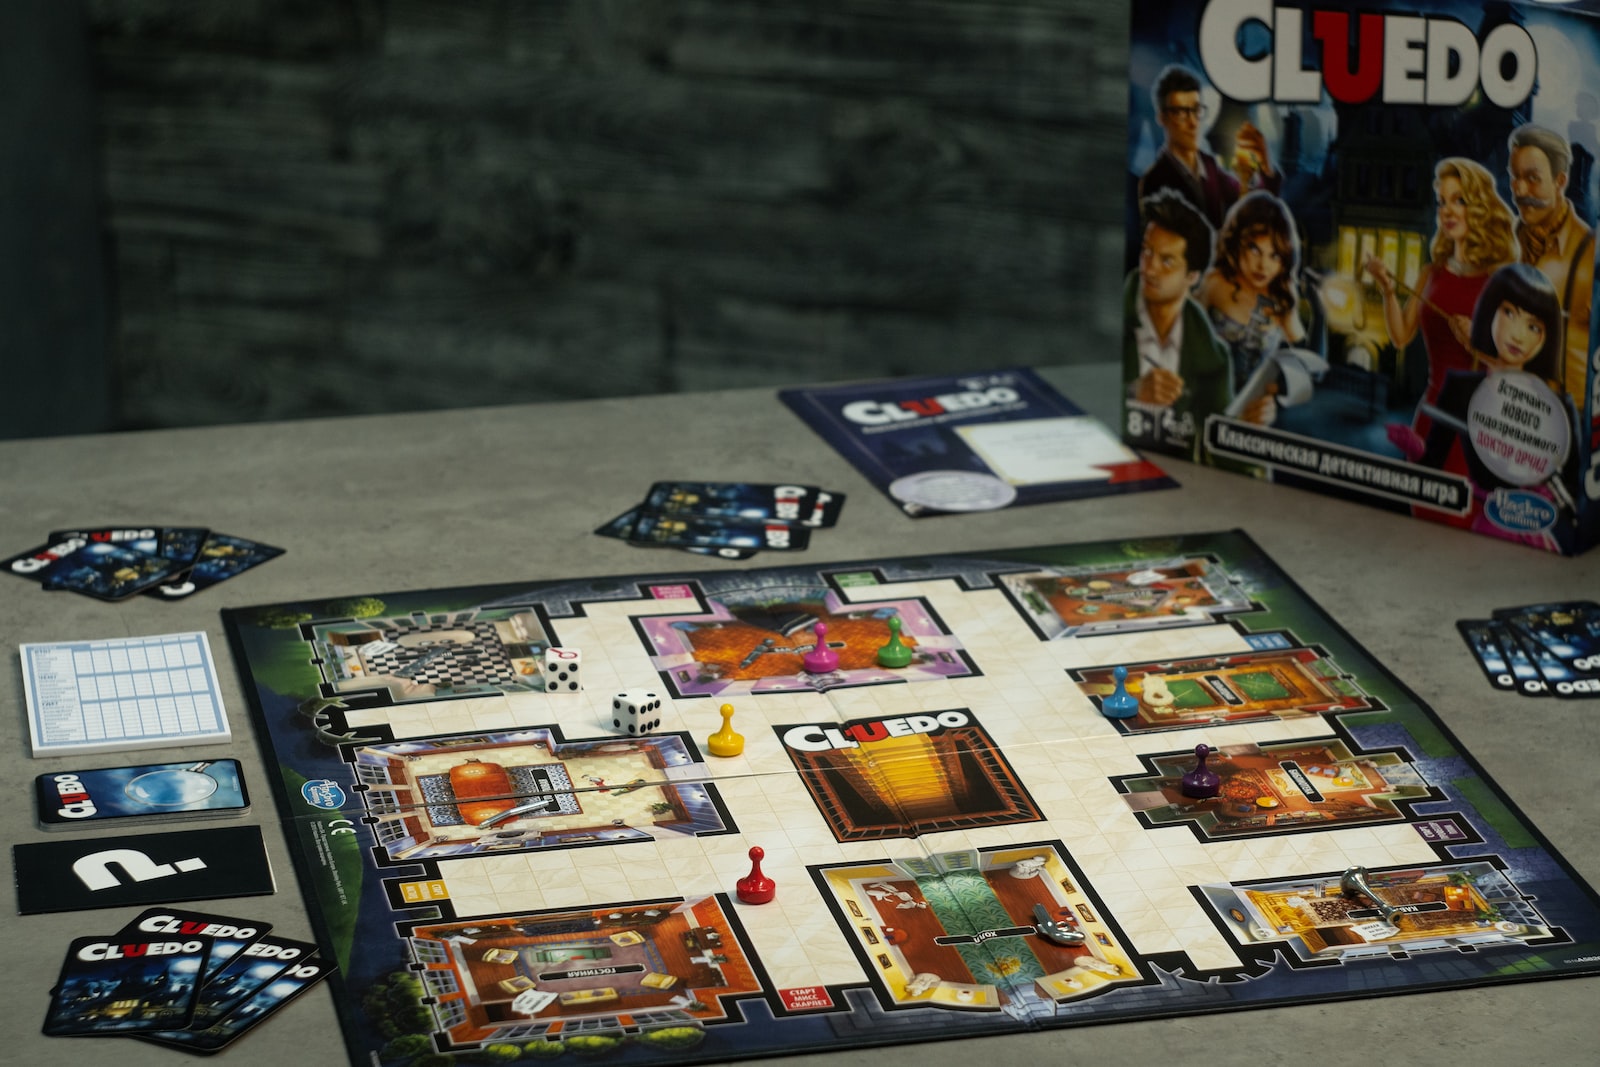 How Long Does It Take To Play a Game of Clue?